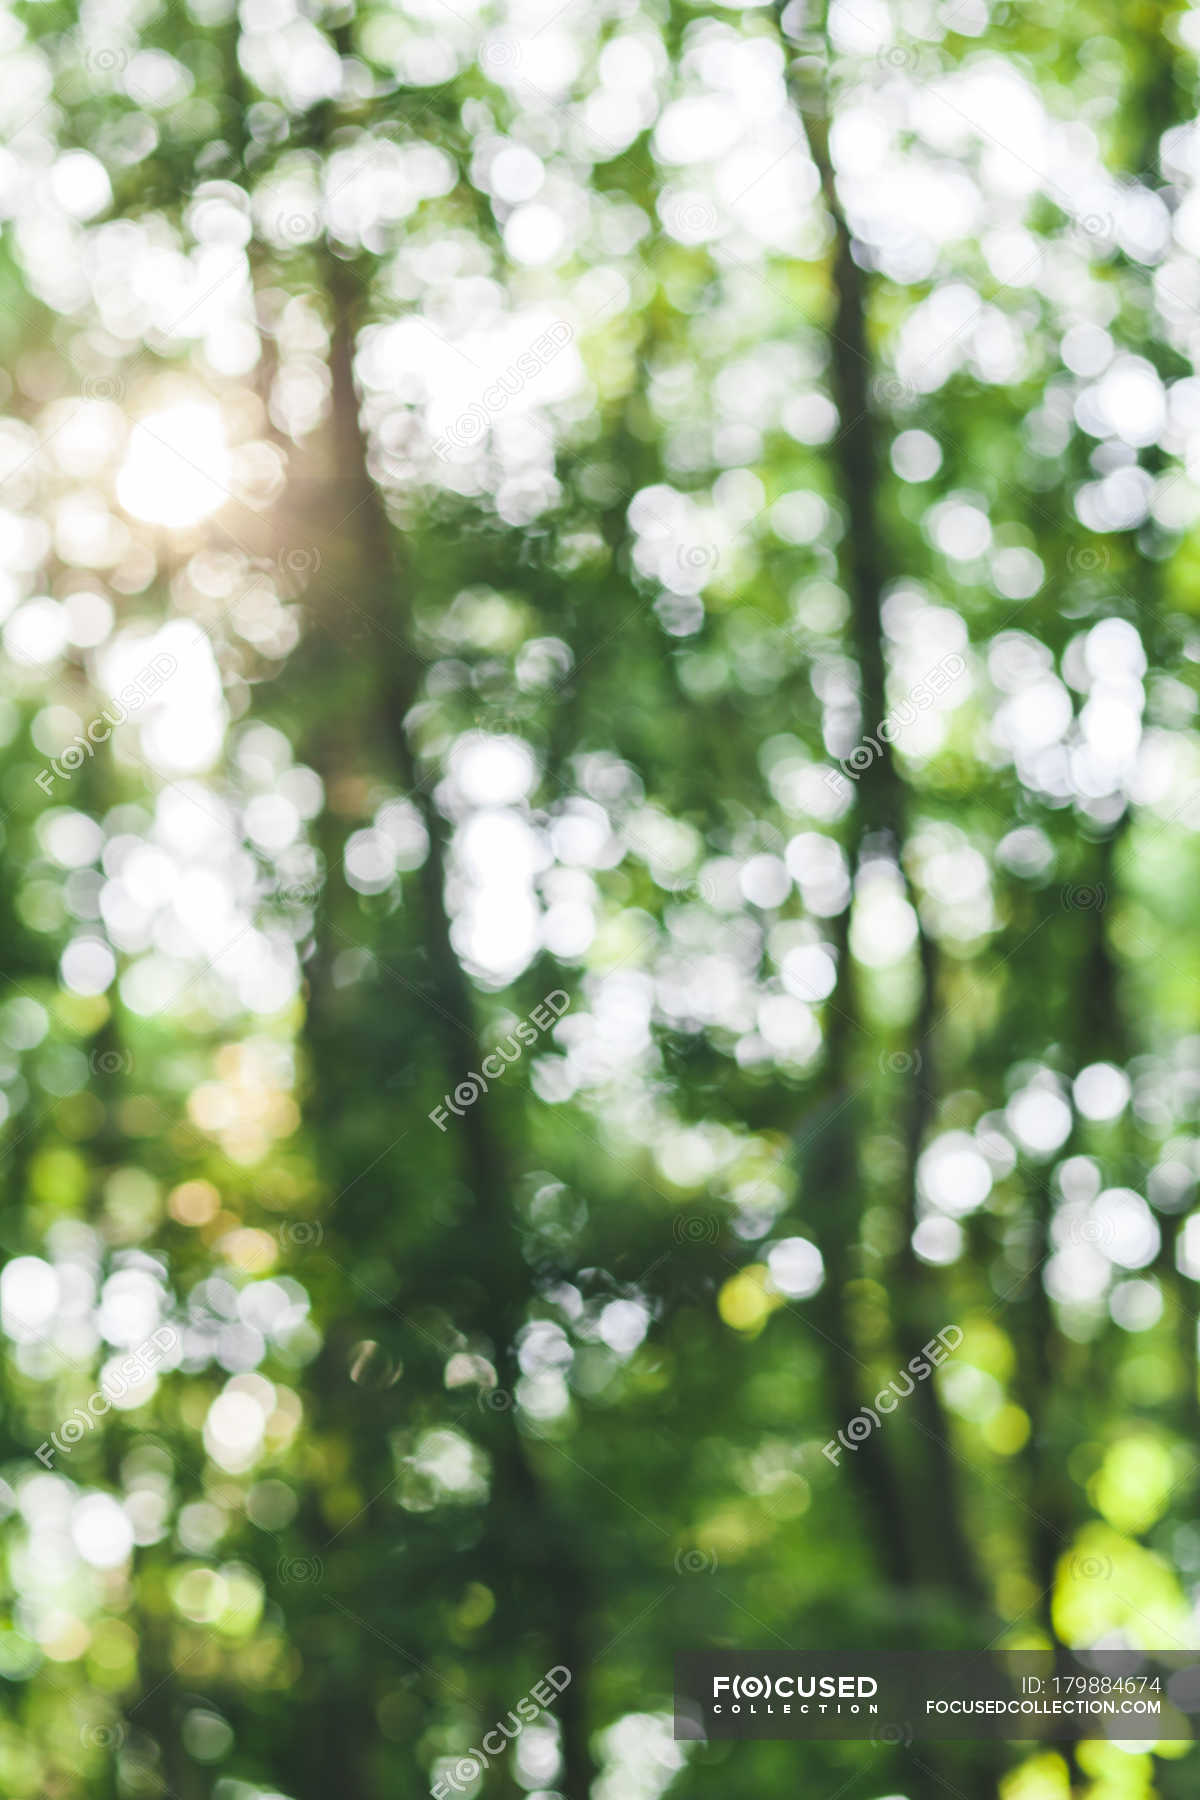 Defocused forest during daytime on blurred background — tree trunks,  bulgaria - Stock Photo | #179884674